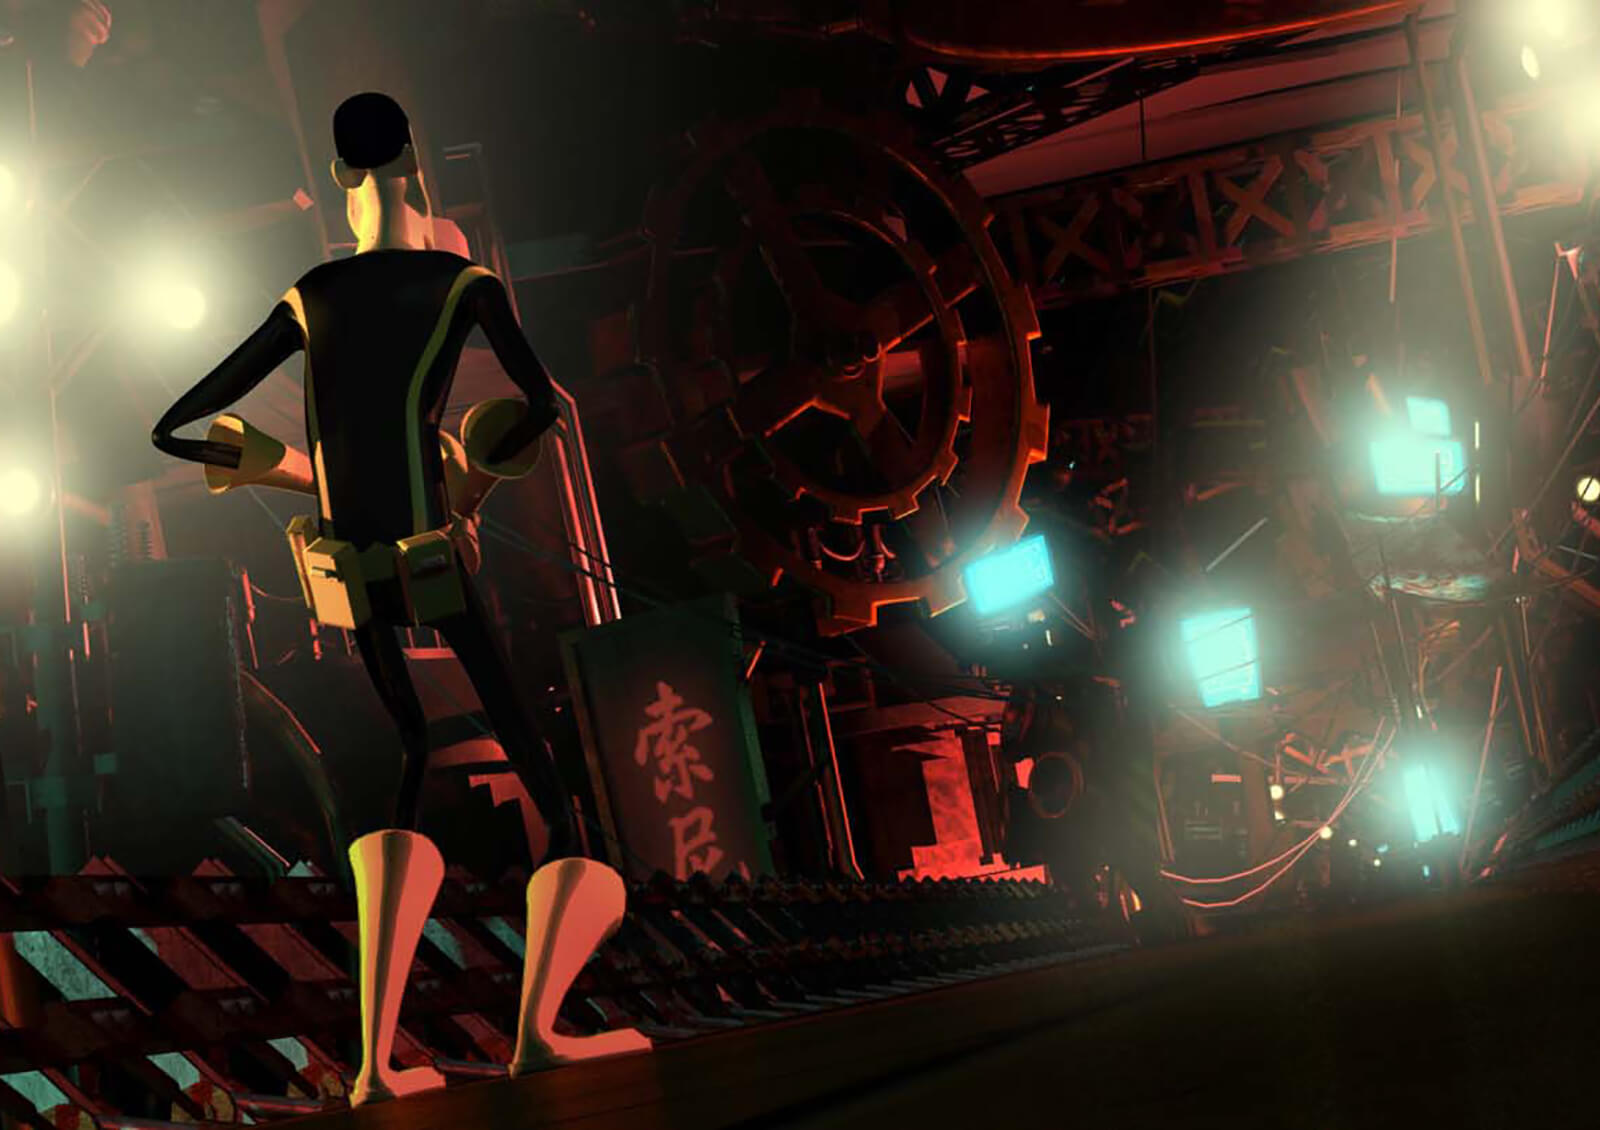 A man in yellow and black spandex tights looks down a red-lit industrial corridor